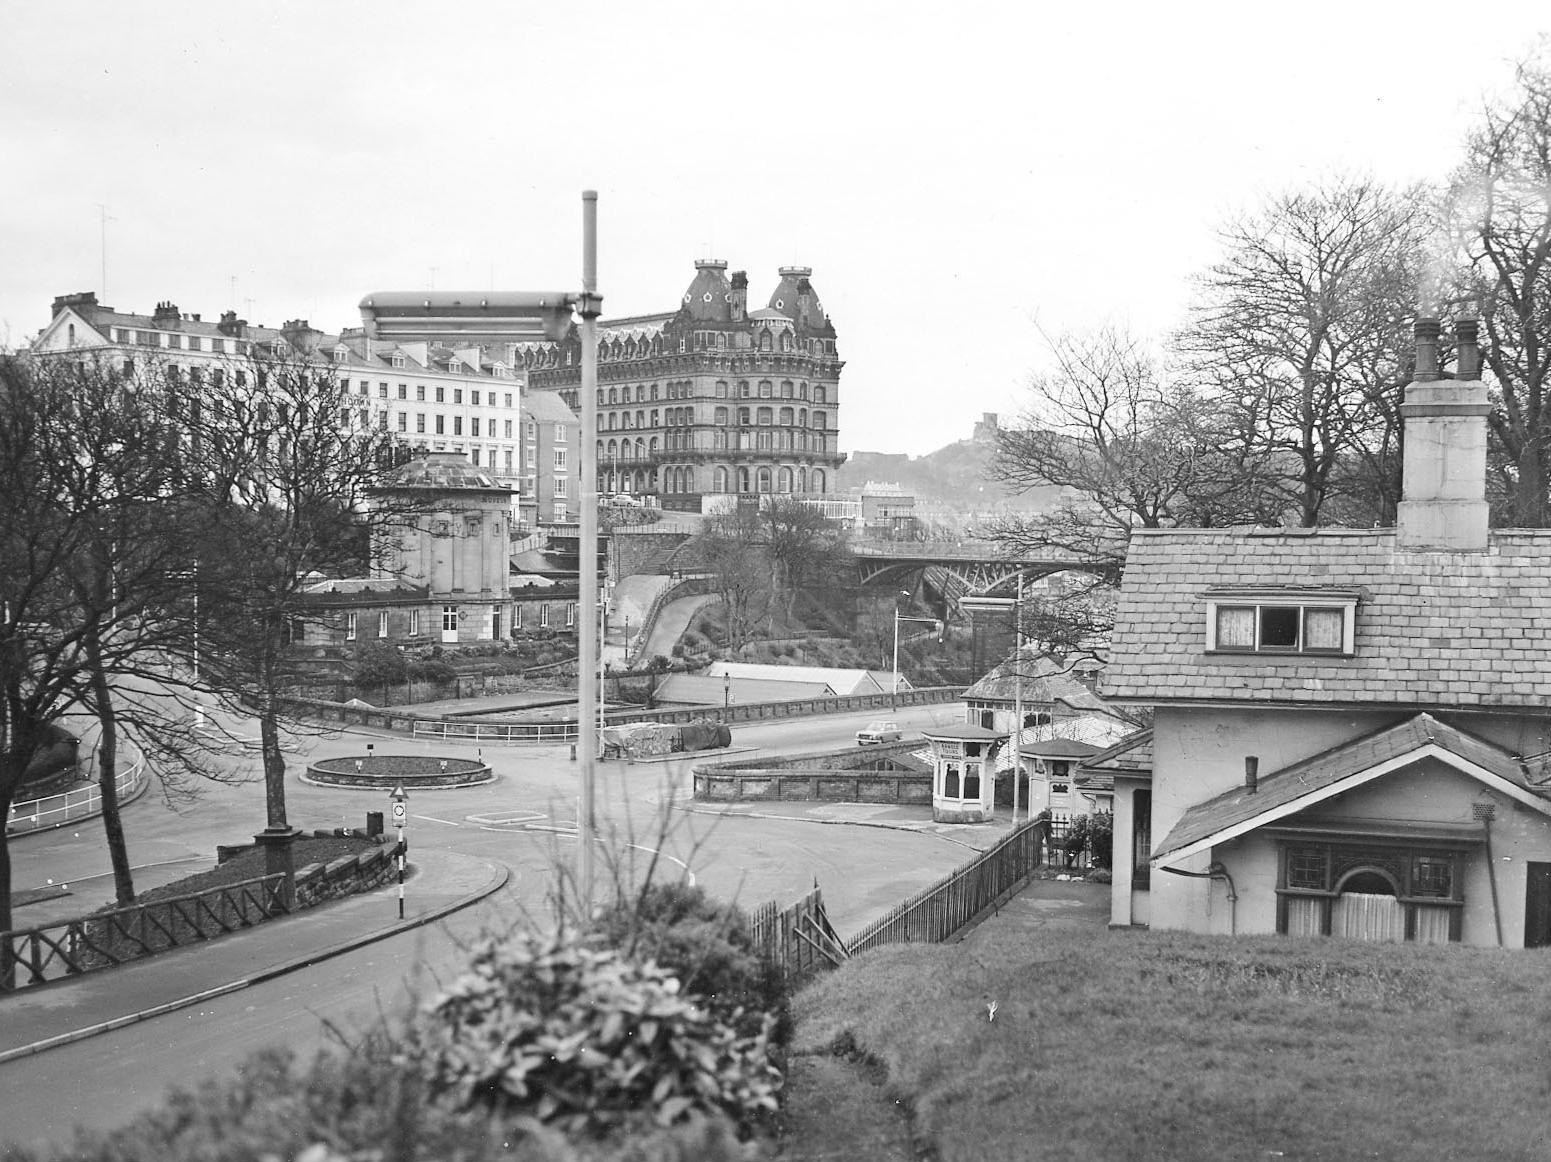 The roundabout at the bottom of Valley Road looks different to today, though the Rotunda can be seen behind.